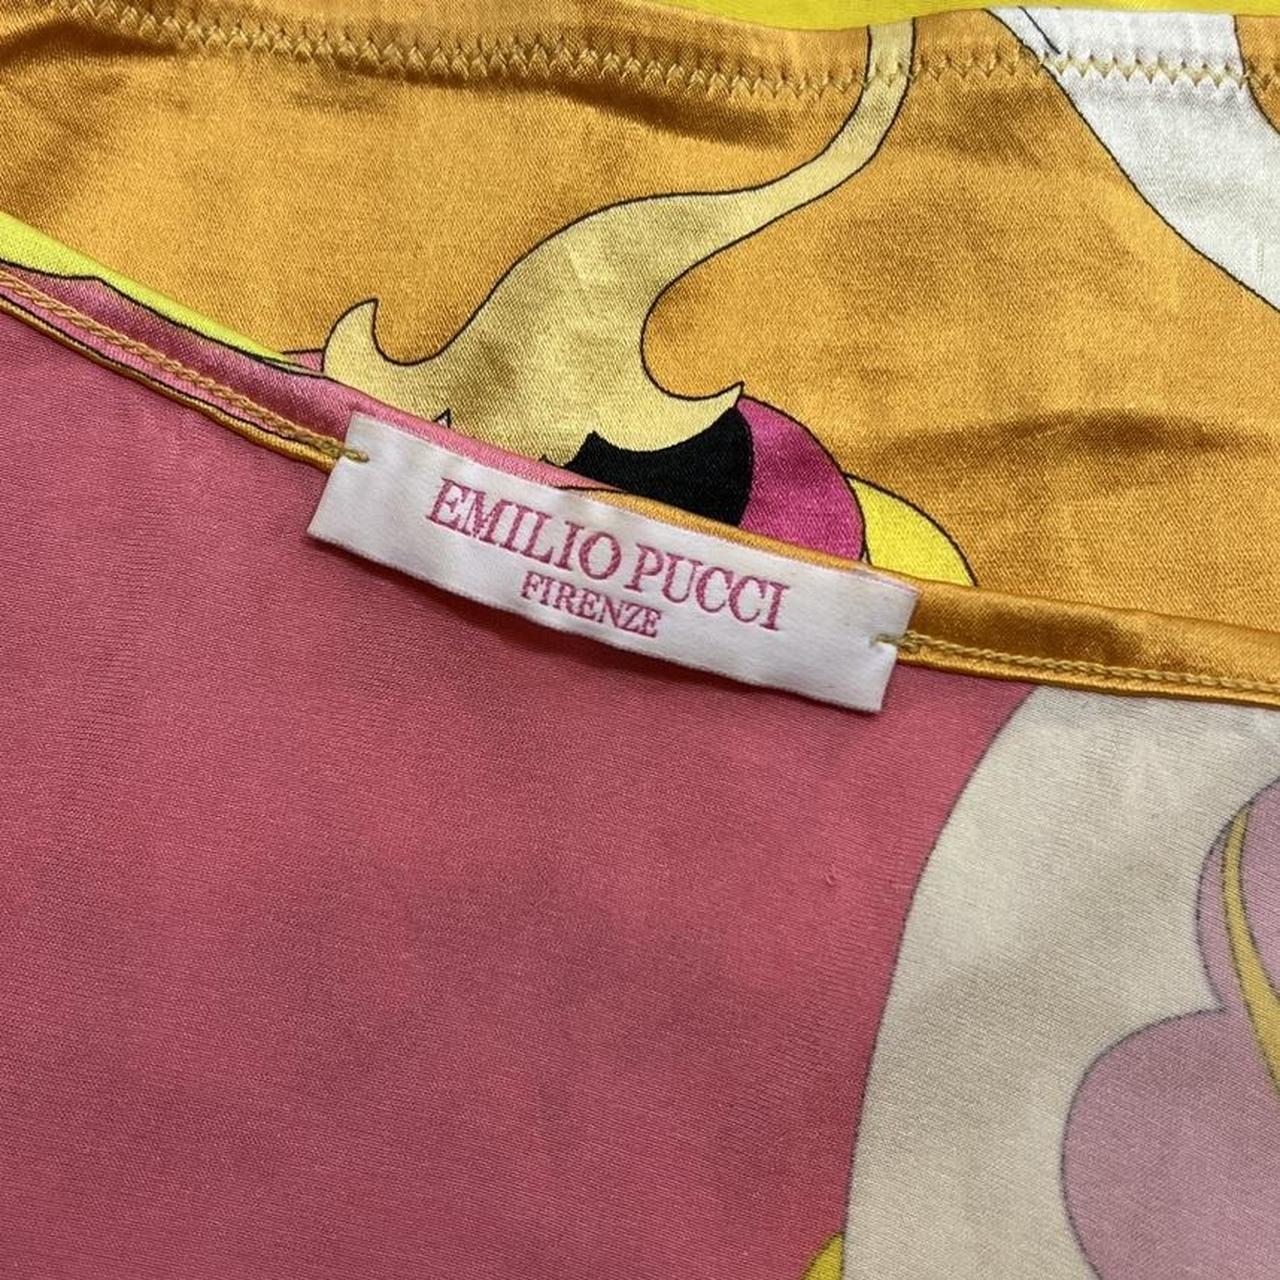 Emilio Pucci Women's Pink and Yellow Vest (8)